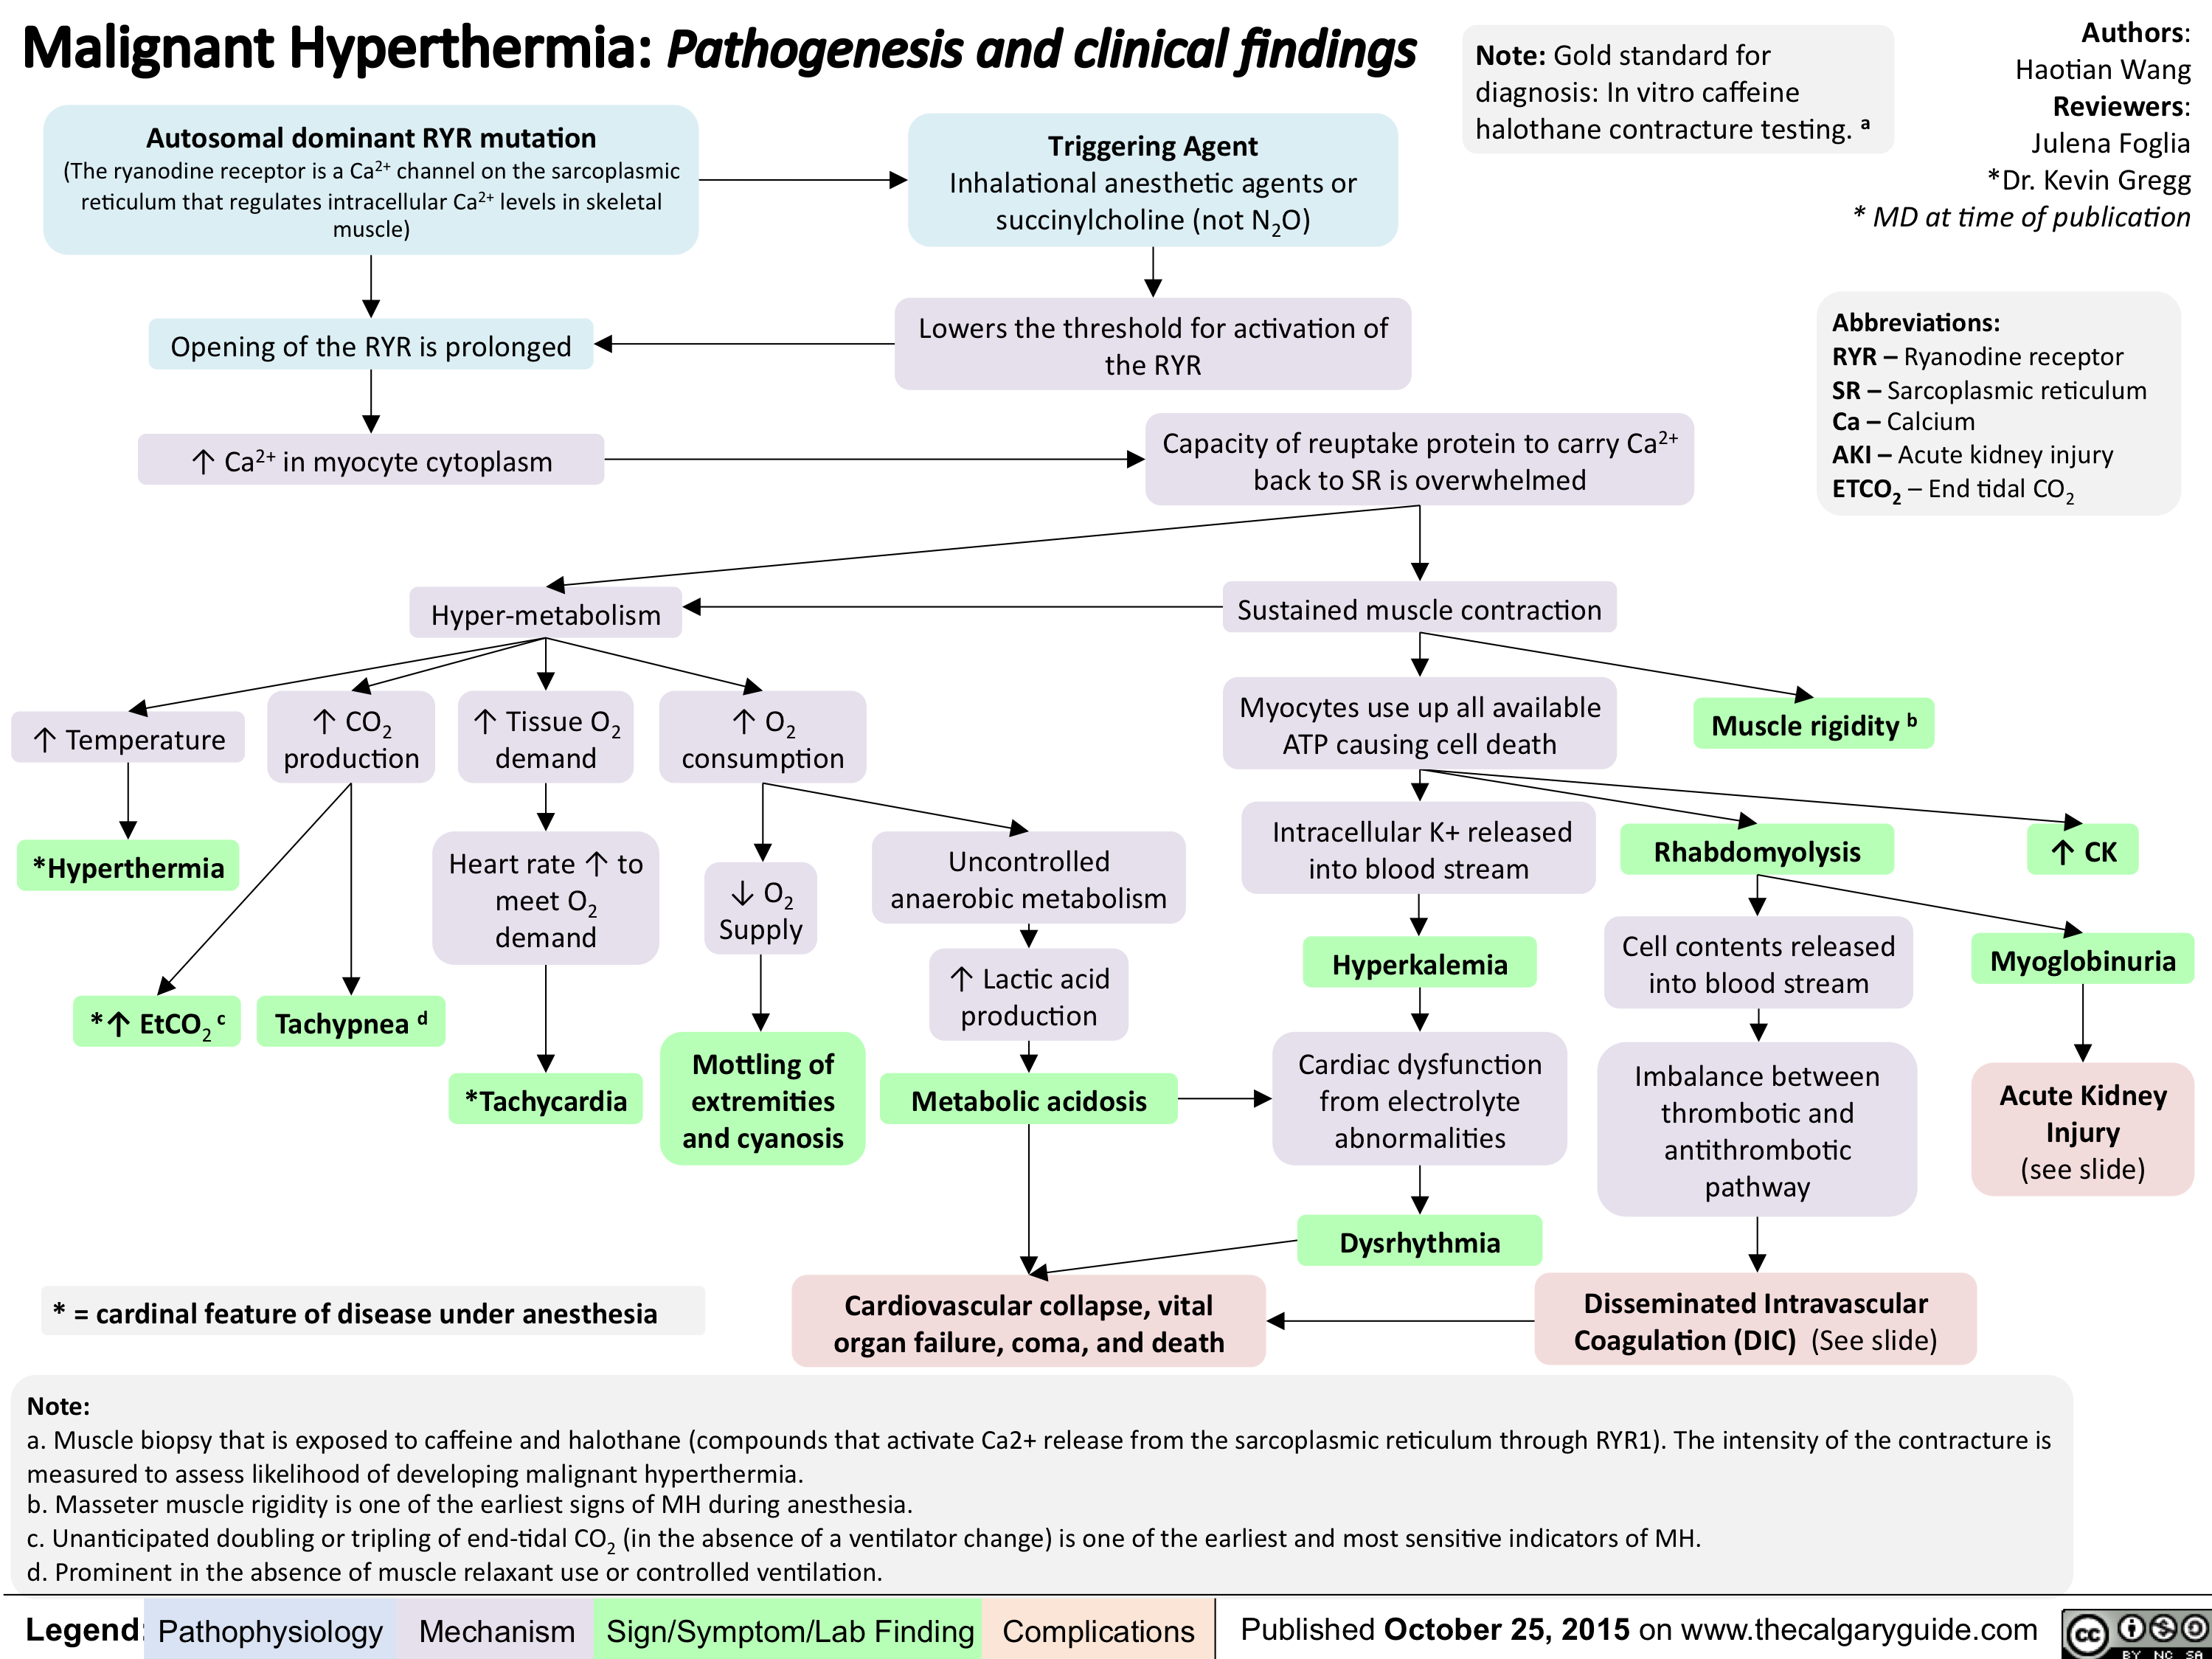 Malignant Hyperthermia-Pathogenesis and clinical findings